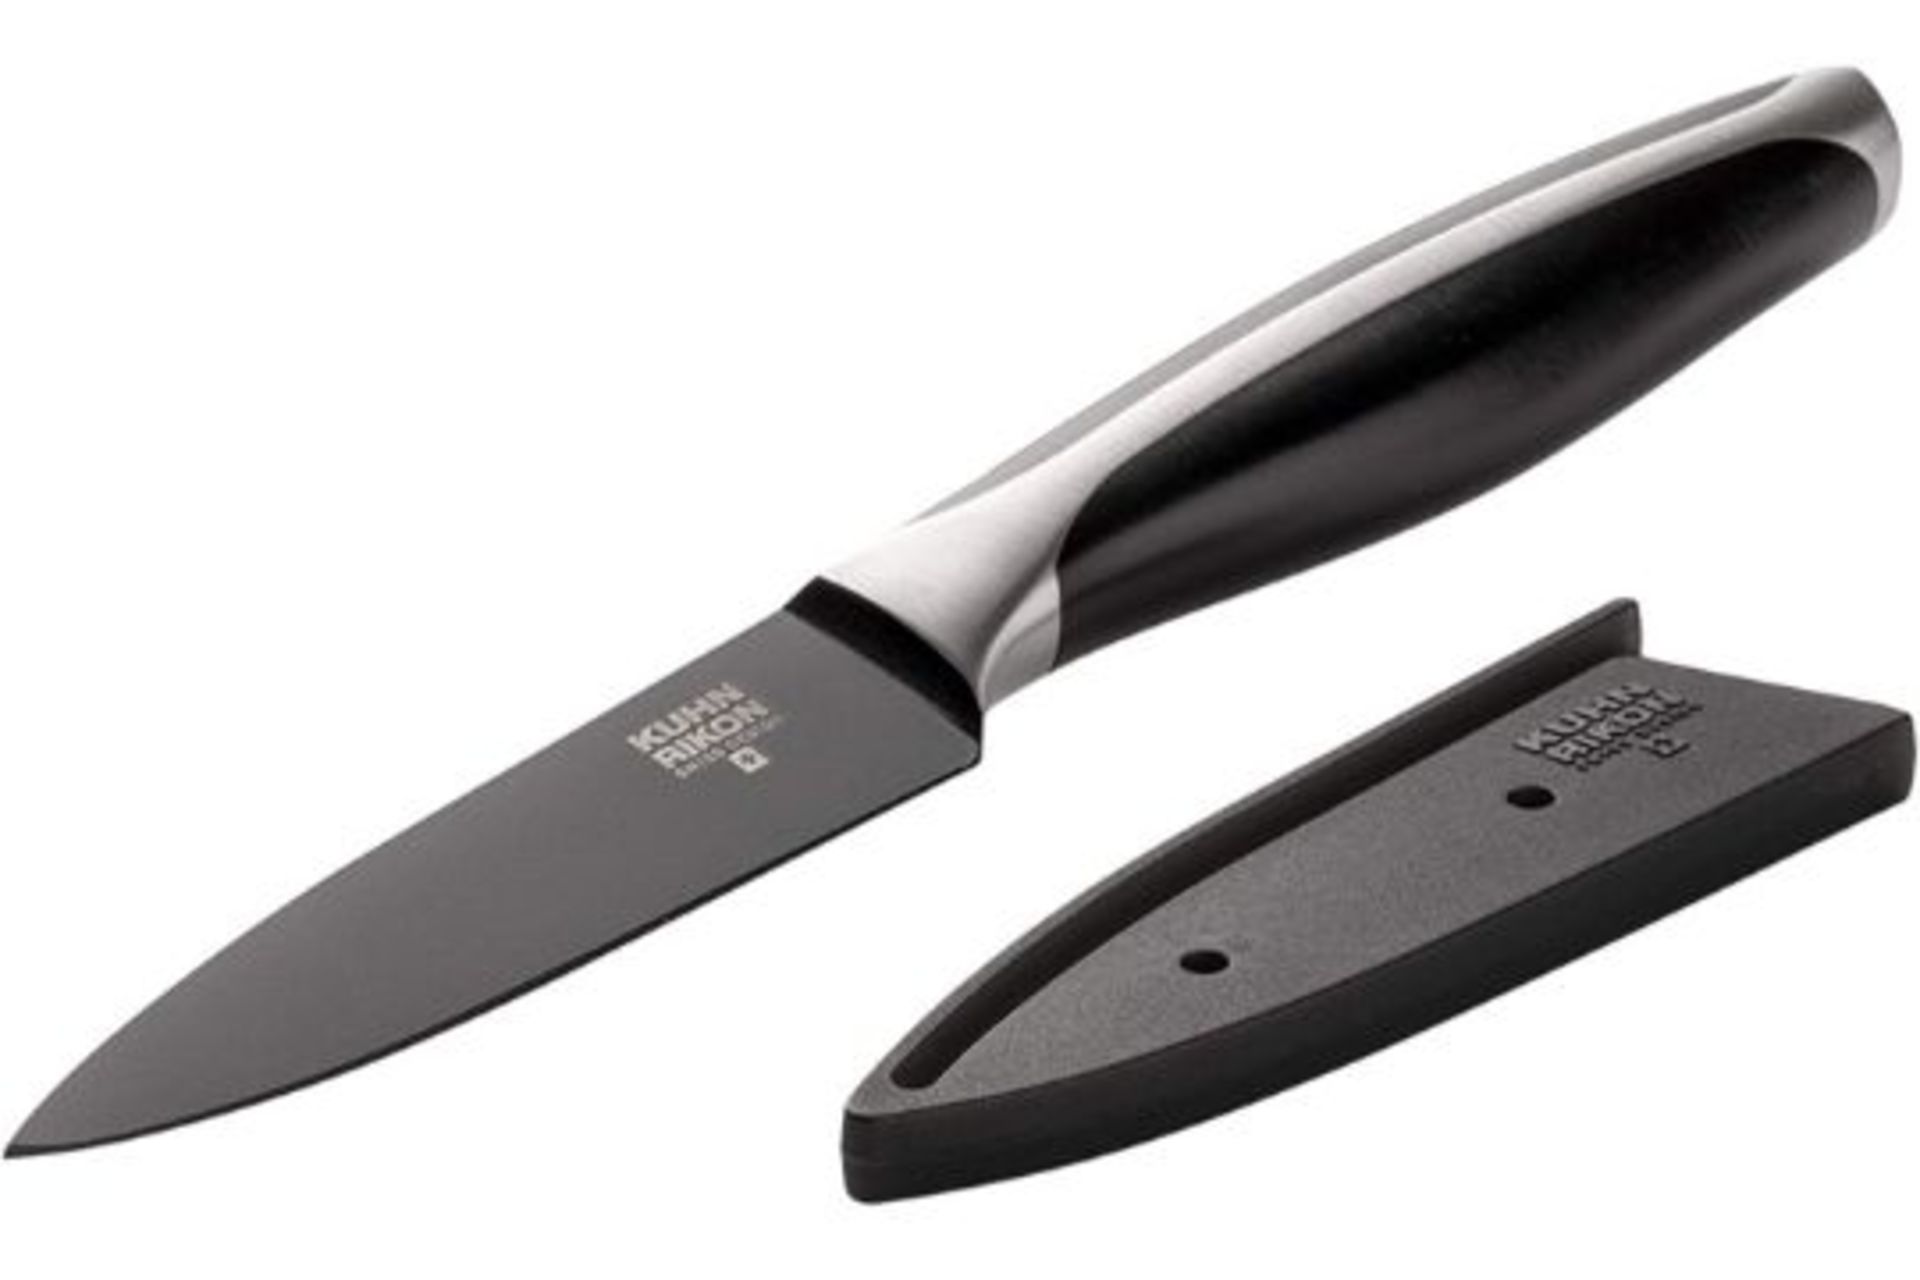 BRAND NEW KUHN RIKON 20CM STAINLESS STEEL CHEFS KNIFE WITH BLADE PROTECTOR - RRP £19.99.